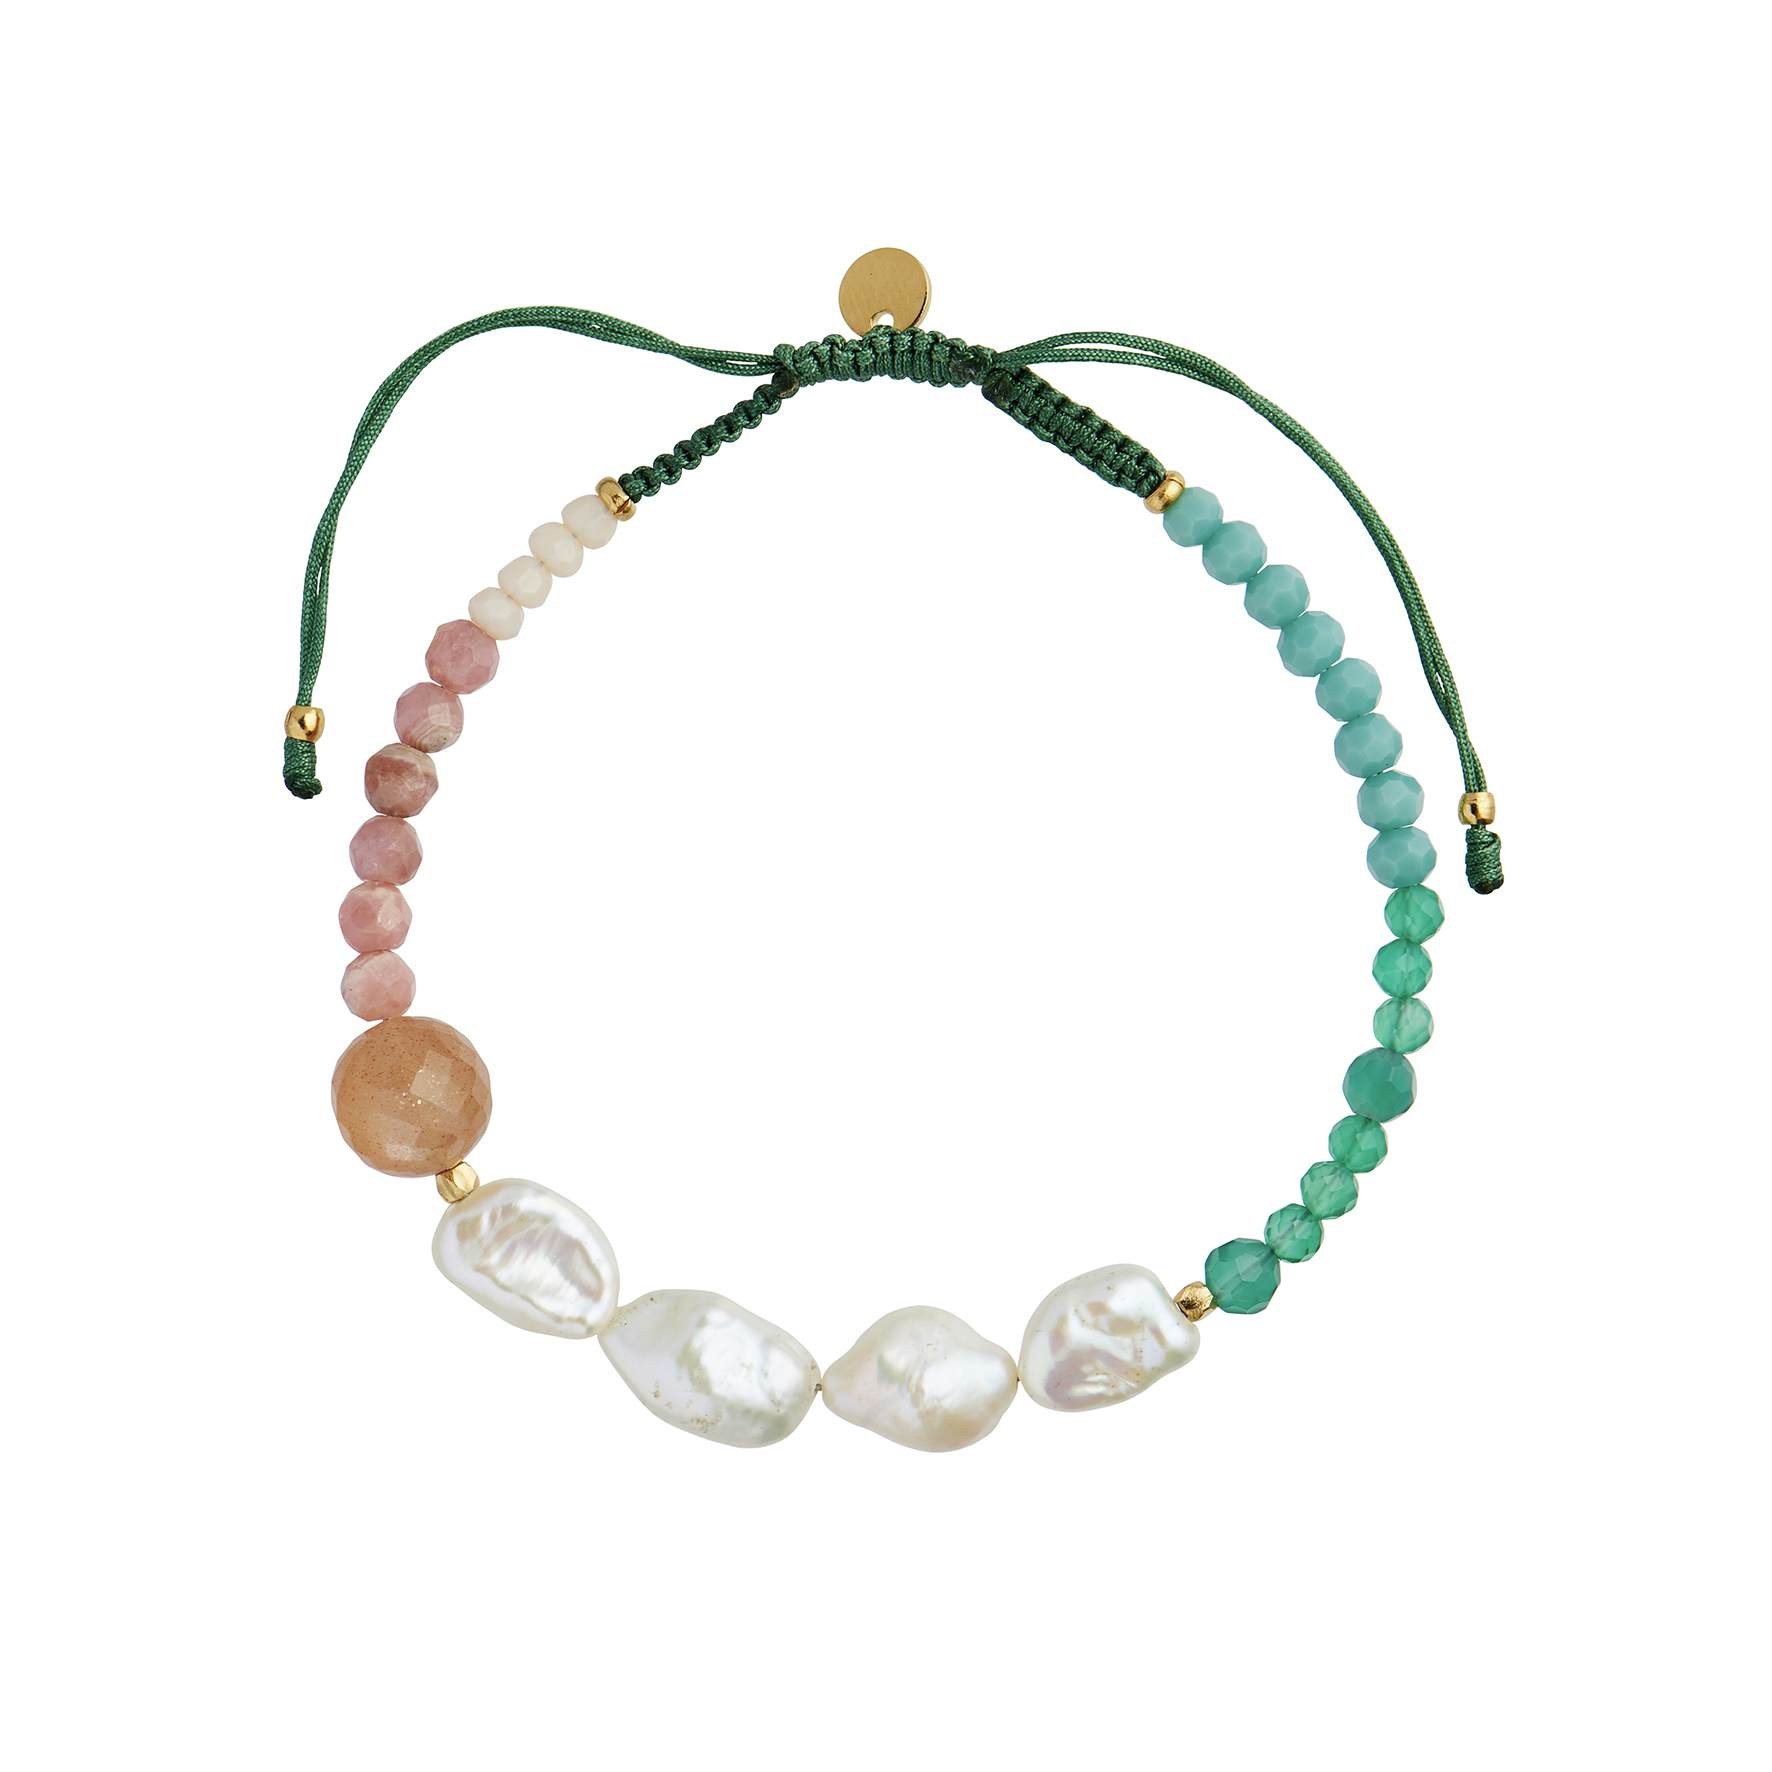 Powder Fall Bracelet With Stones And Pearls Pine Green Ribbon